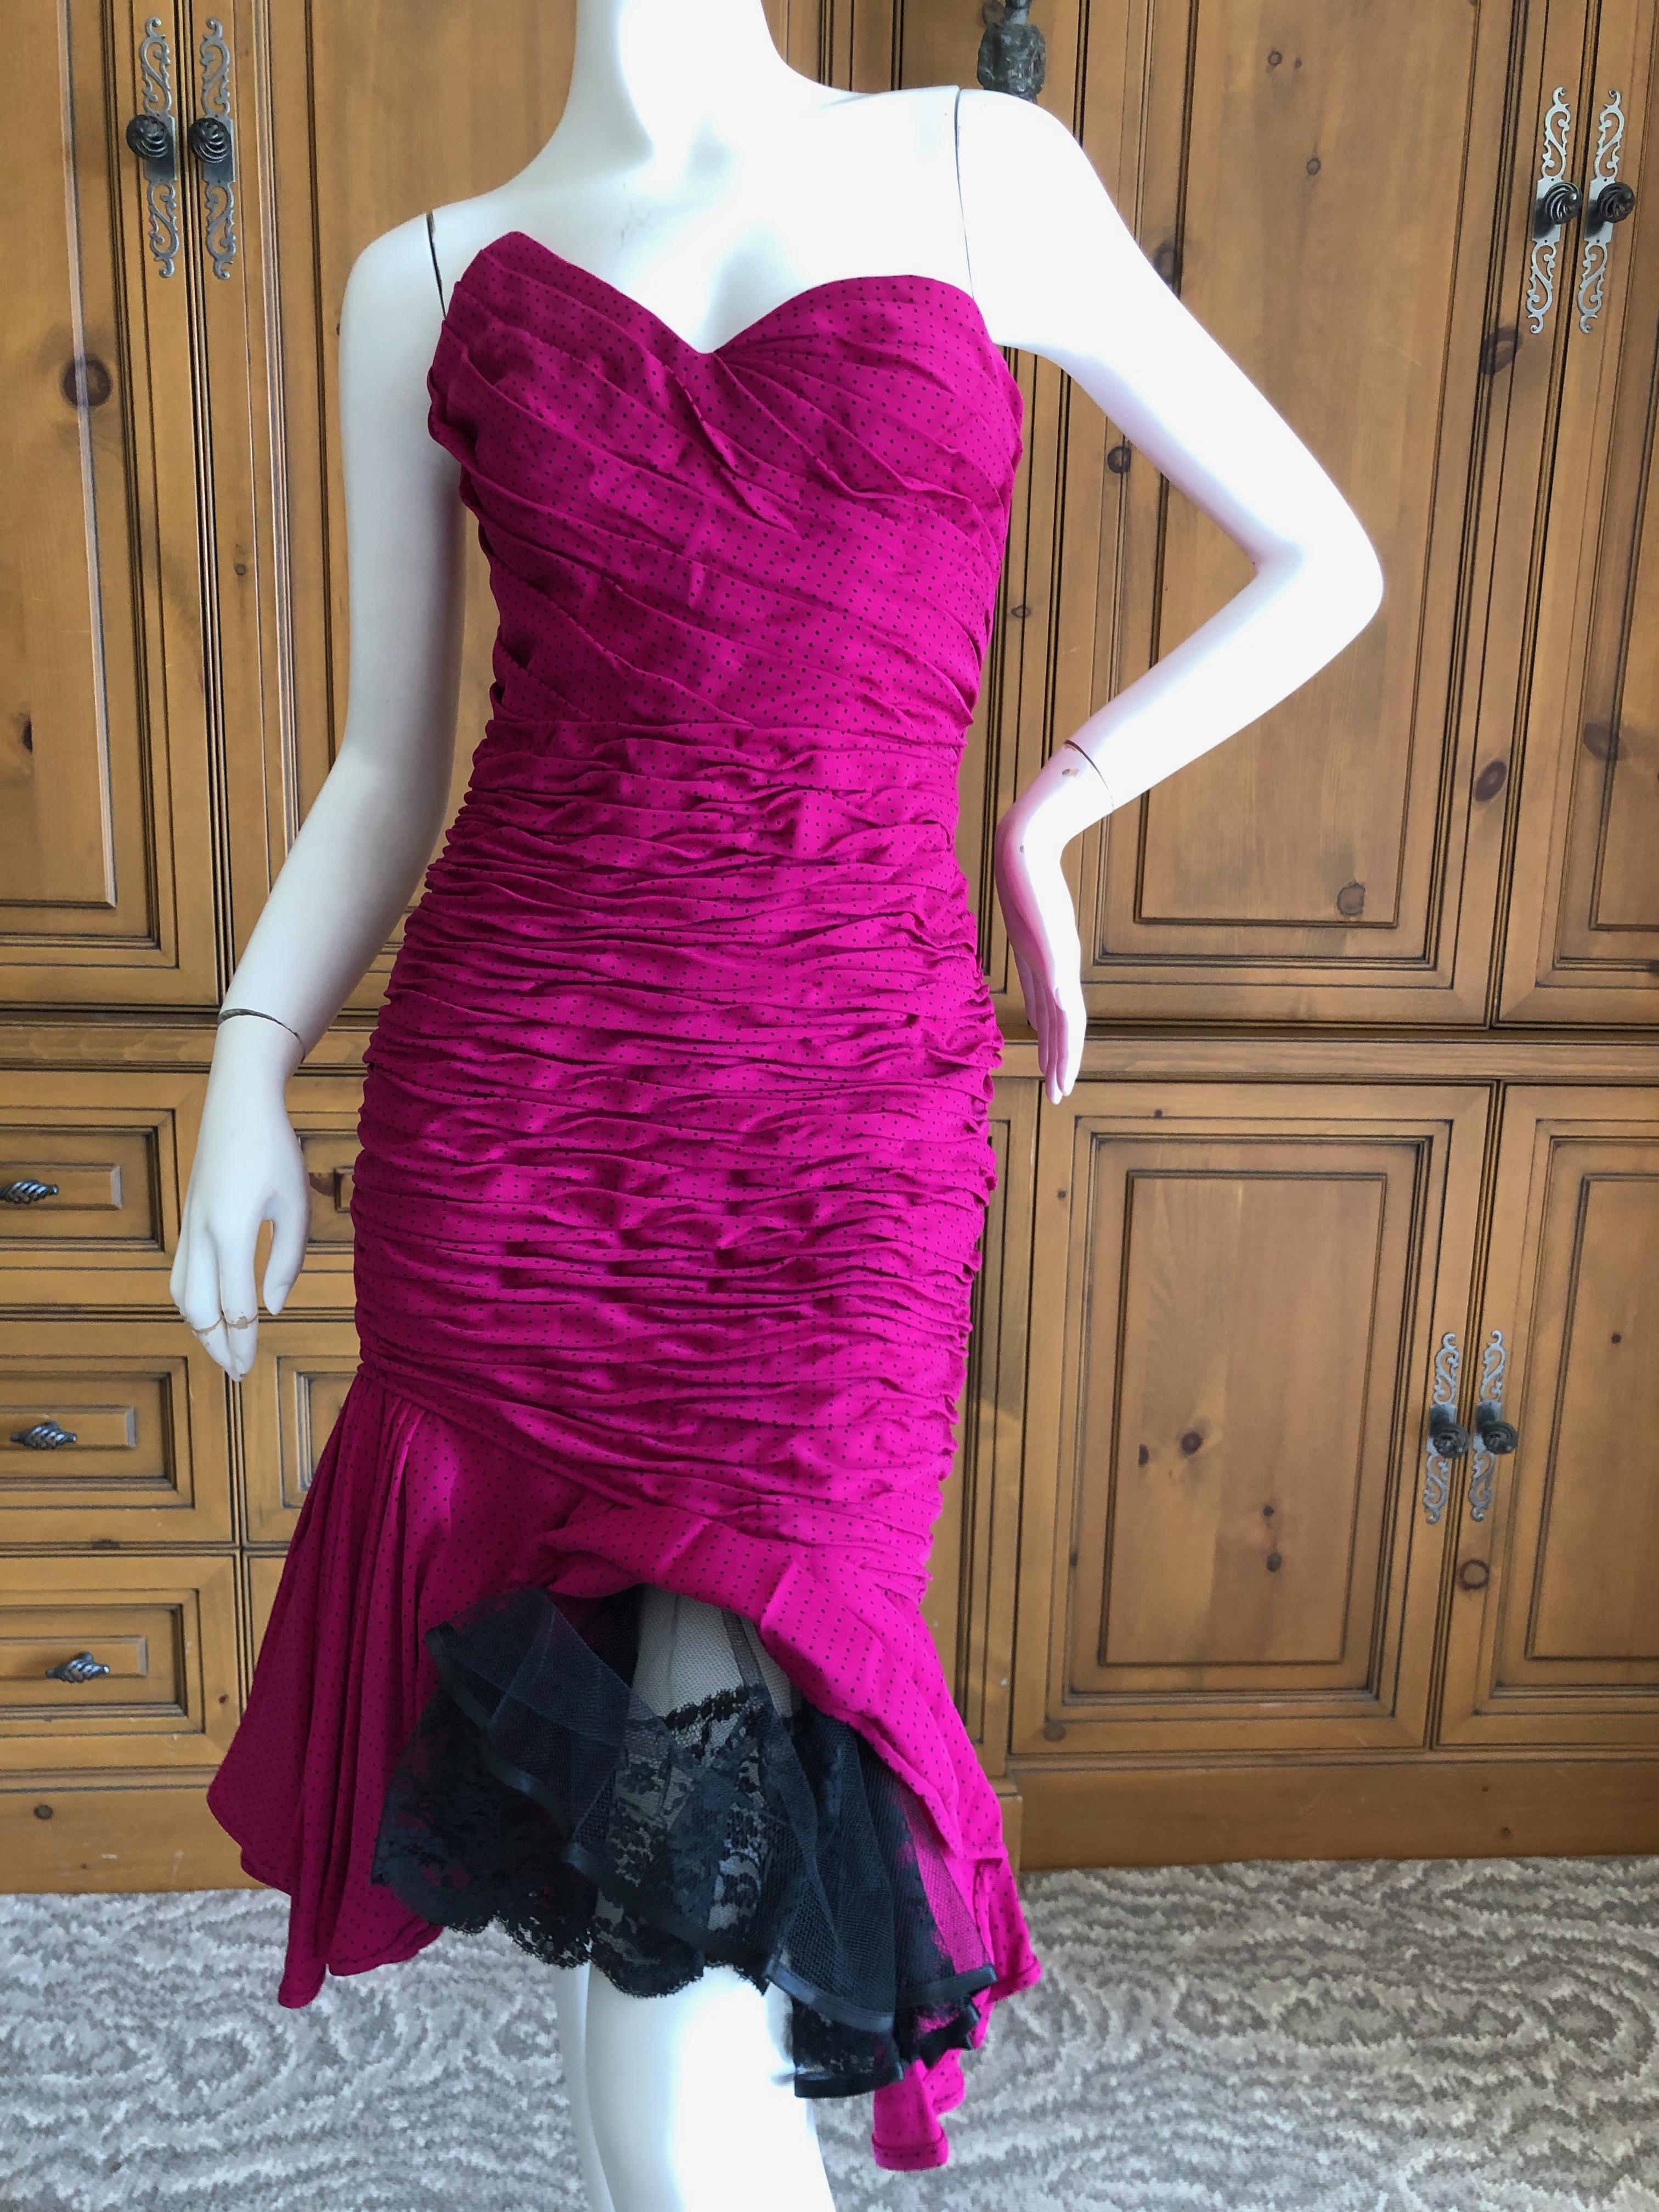 Emanuel Ungaro Parallel Fall 1984 Shirred Strapless Evening Dress w Lace Hem In Excellent Condition For Sale In Cloverdale, CA